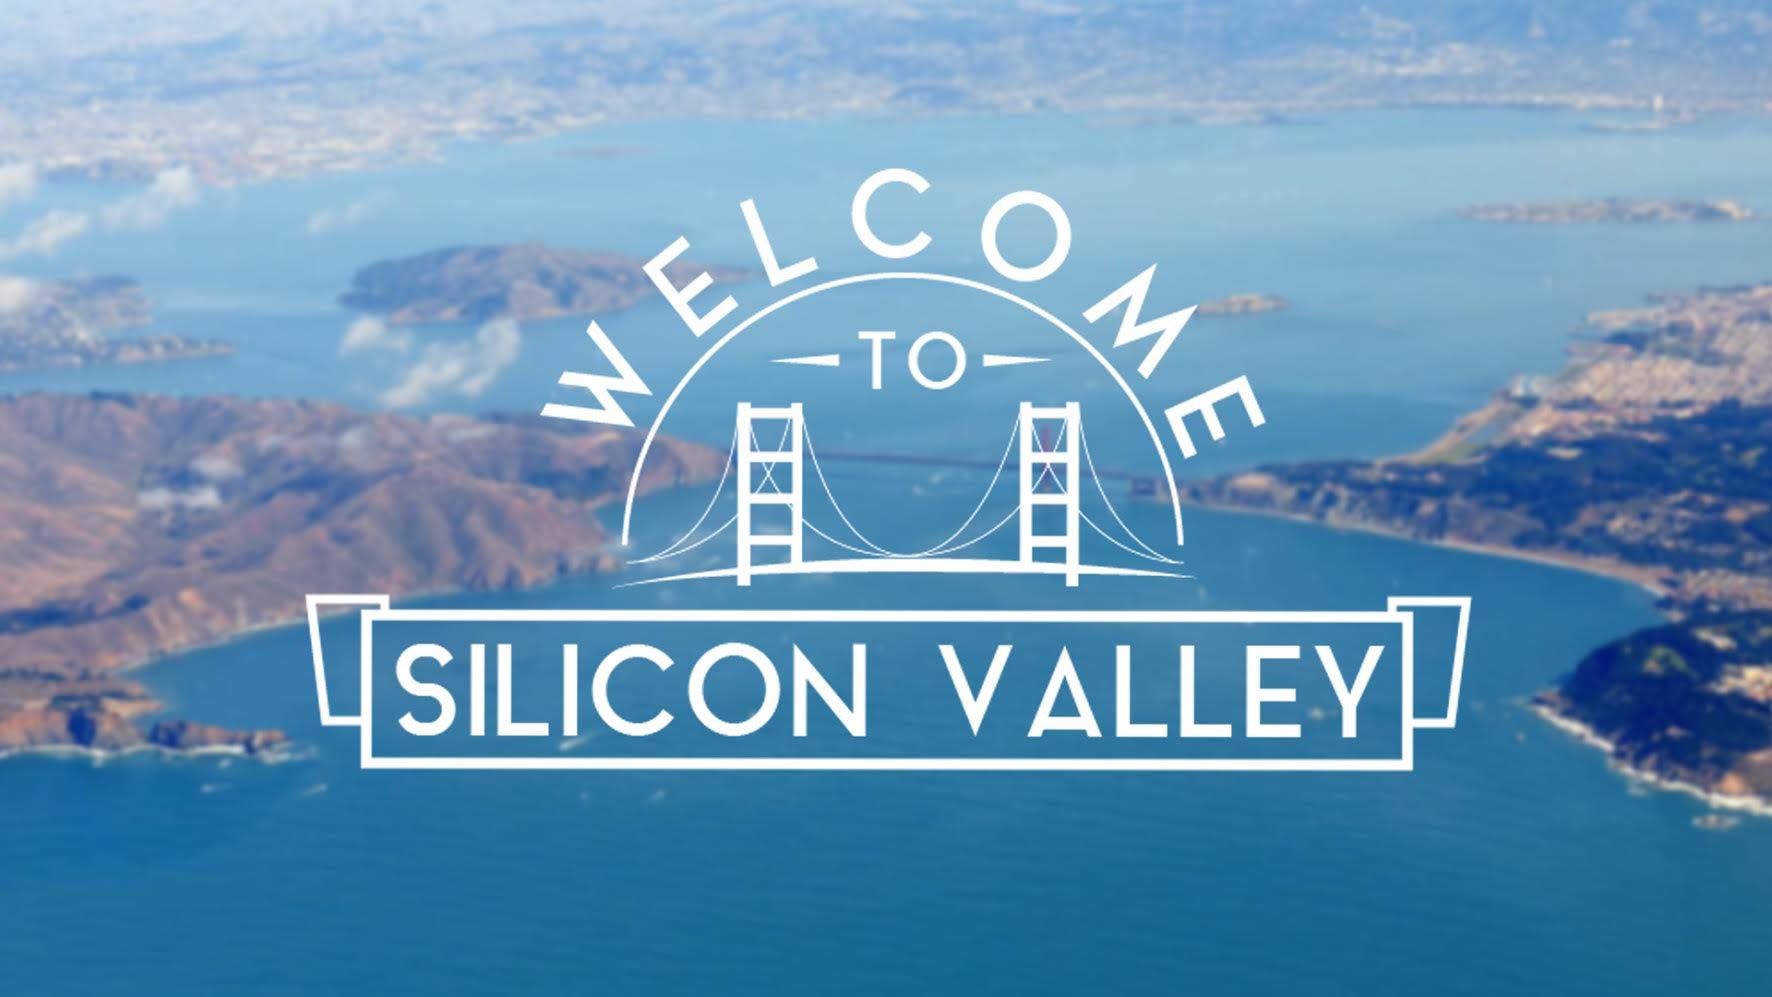 Silicon Valley past and future